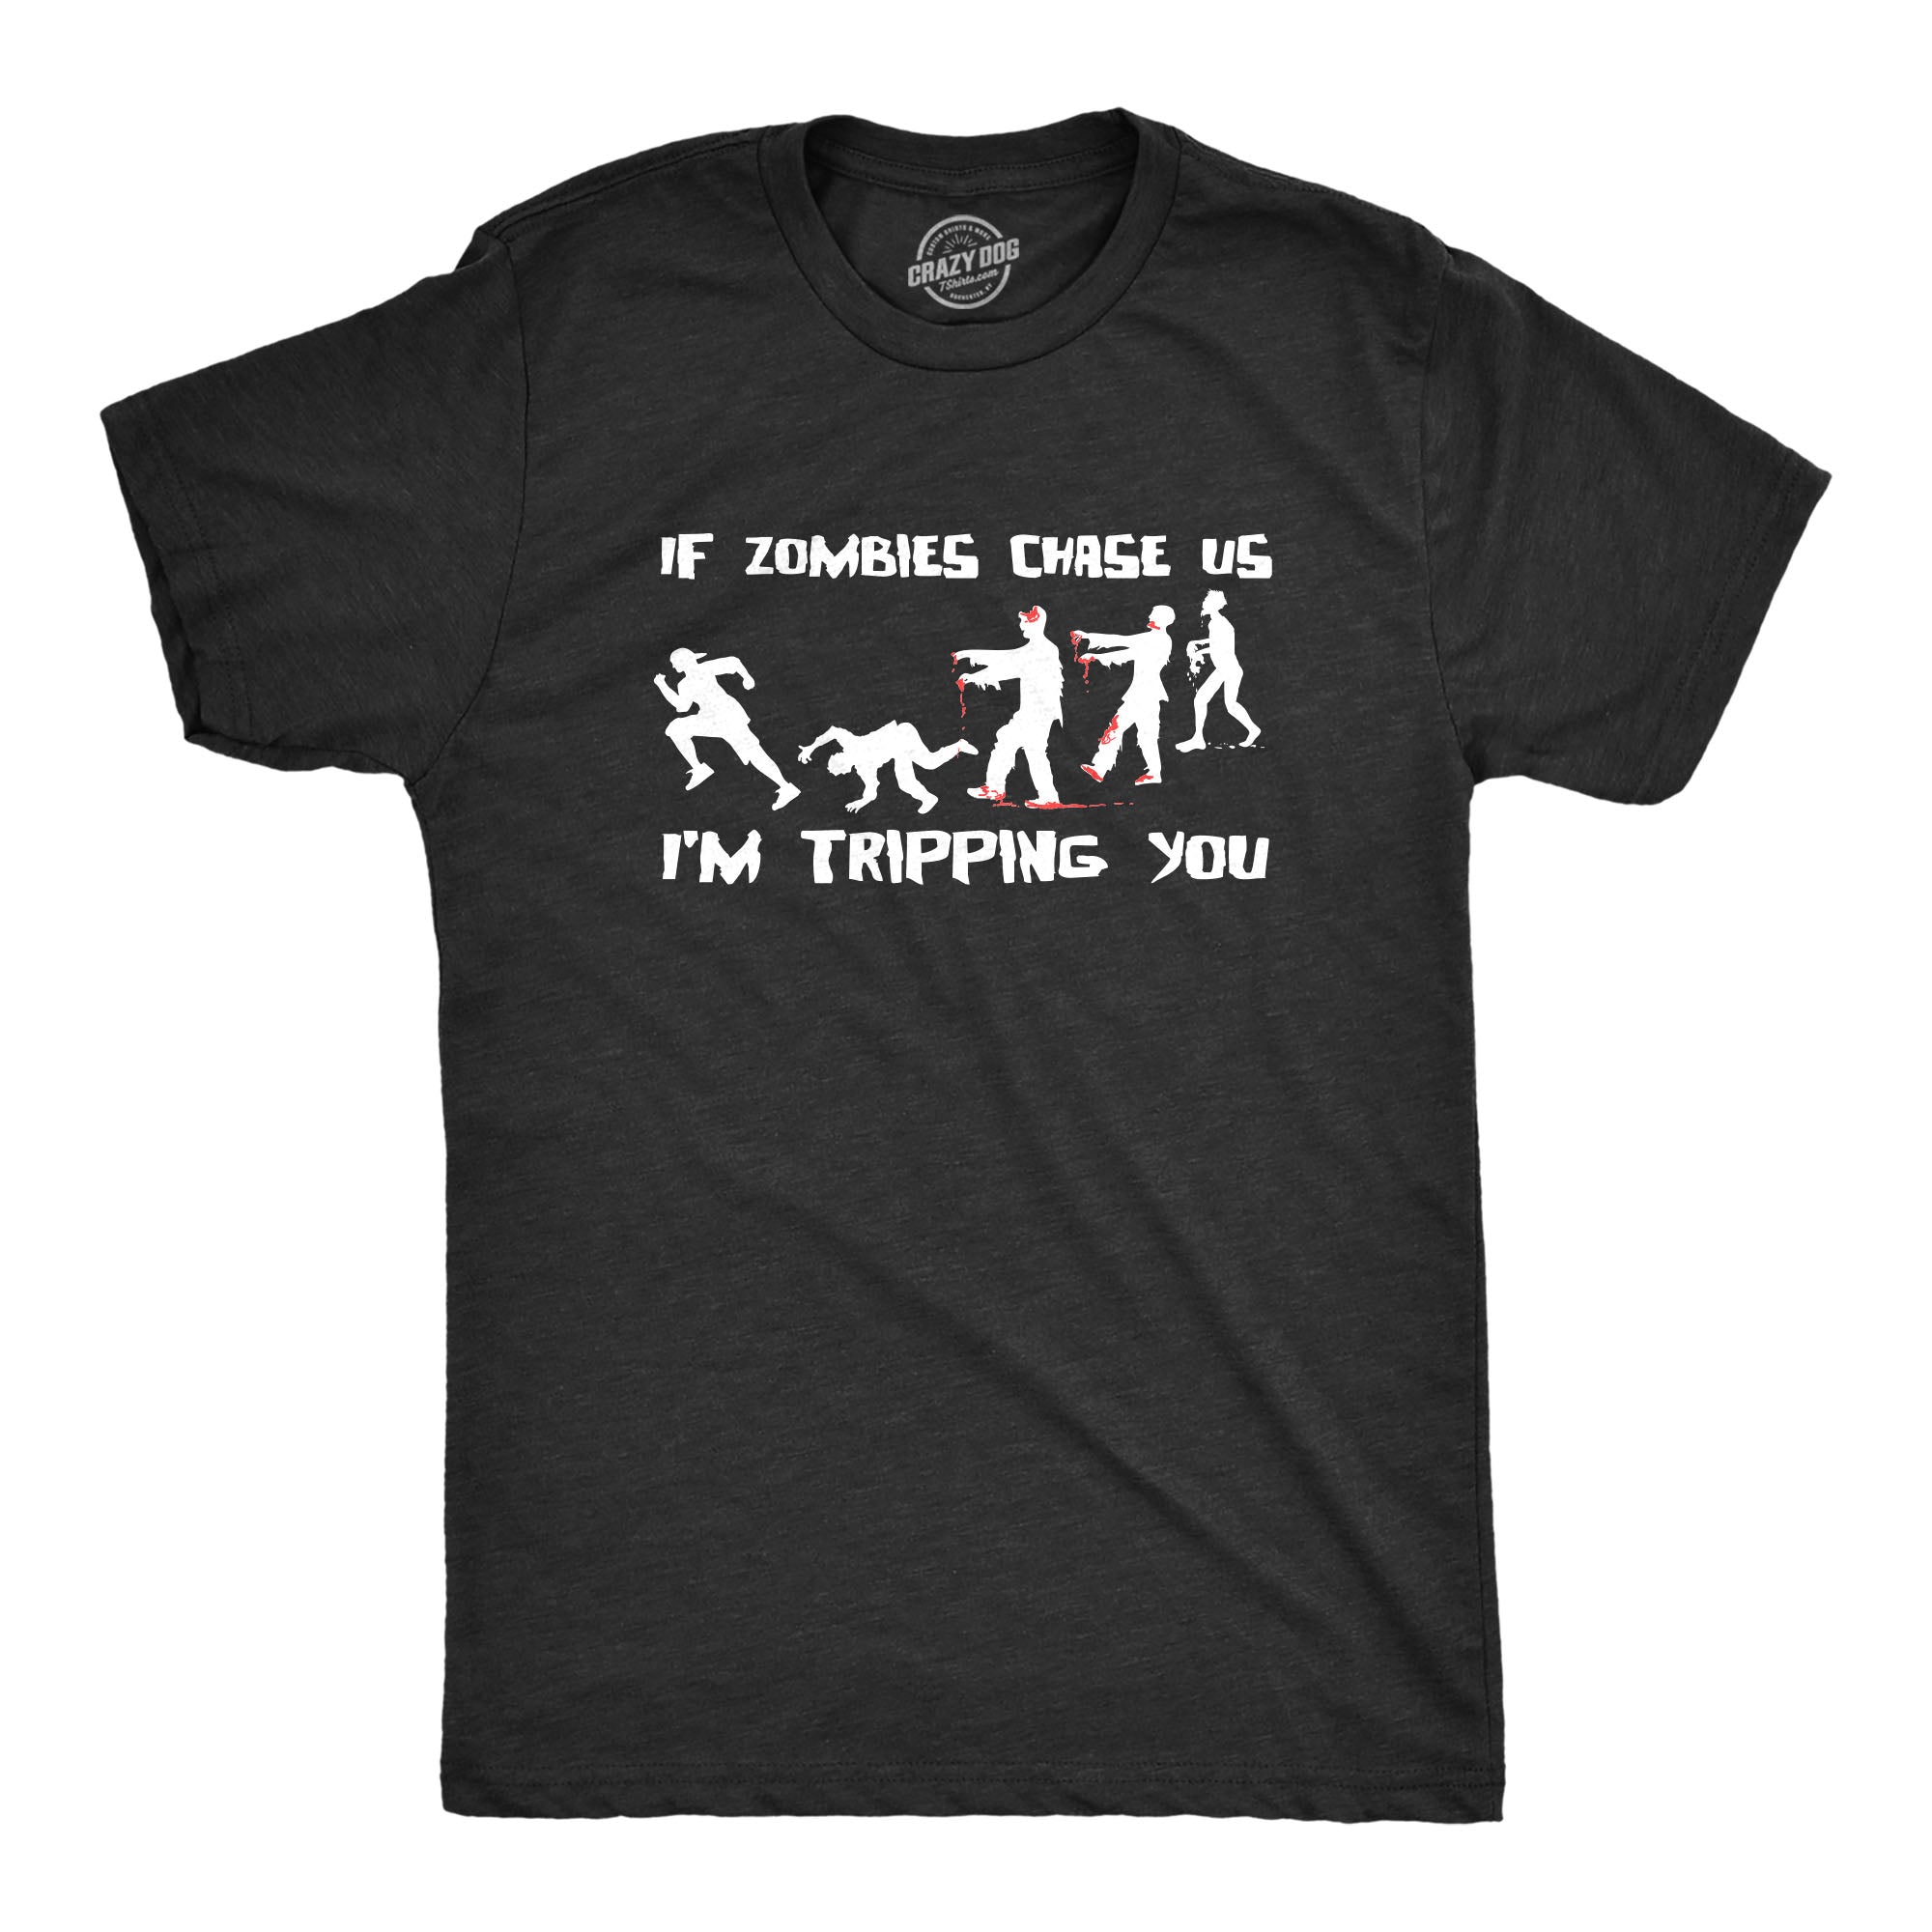 Funny If Zombies Chase Us I'm Tripping You Mens T Shirt Nerdy Tee